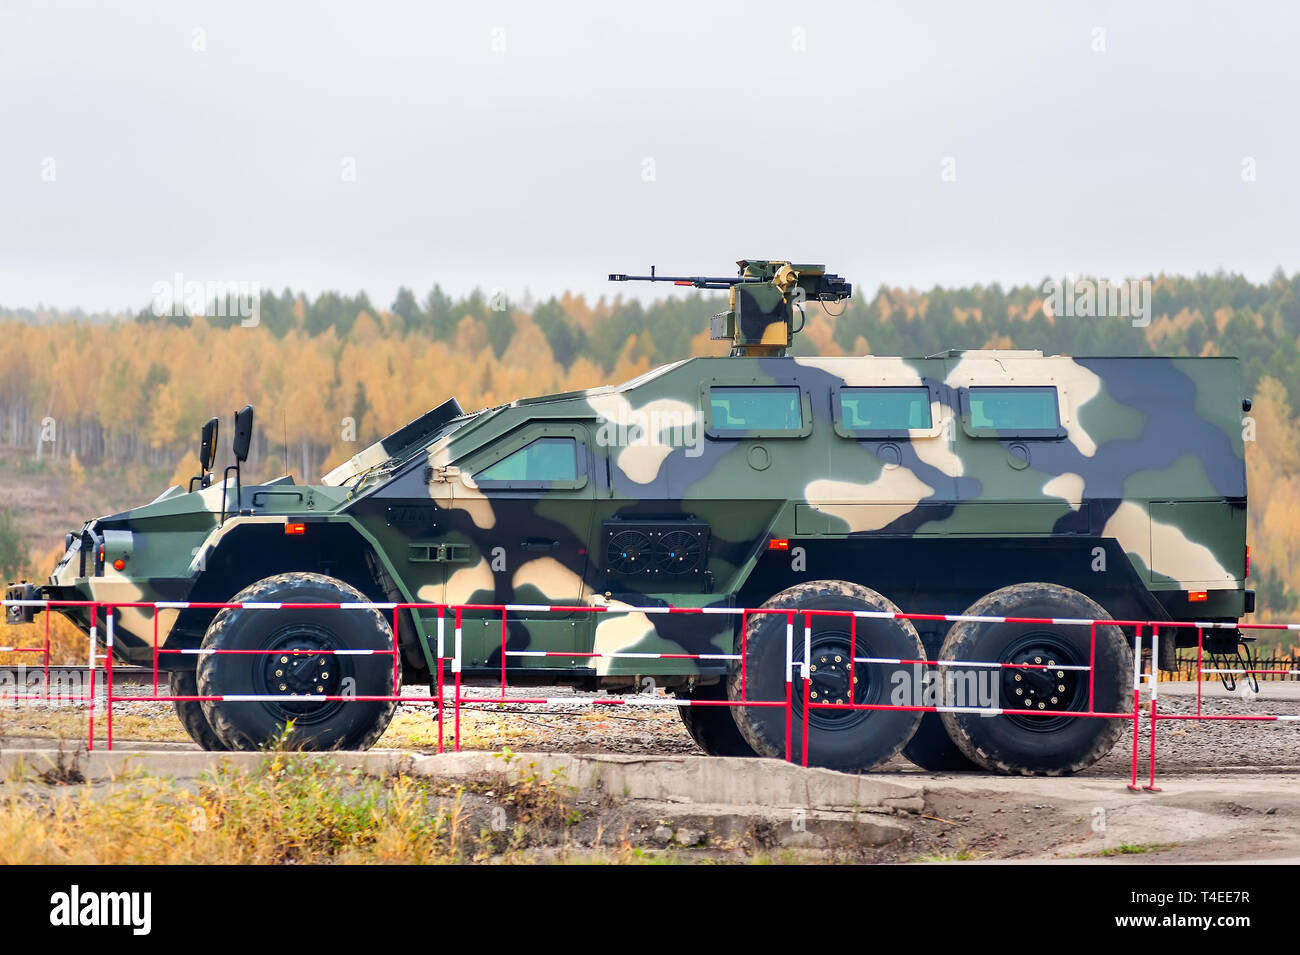 Nizhniy Tagil, Russia - September 27. 2013: SBA-60K2 Bulat armored vehicle with remote weapons turret. It move on the shooting demonstration range. Ru Stock Photo